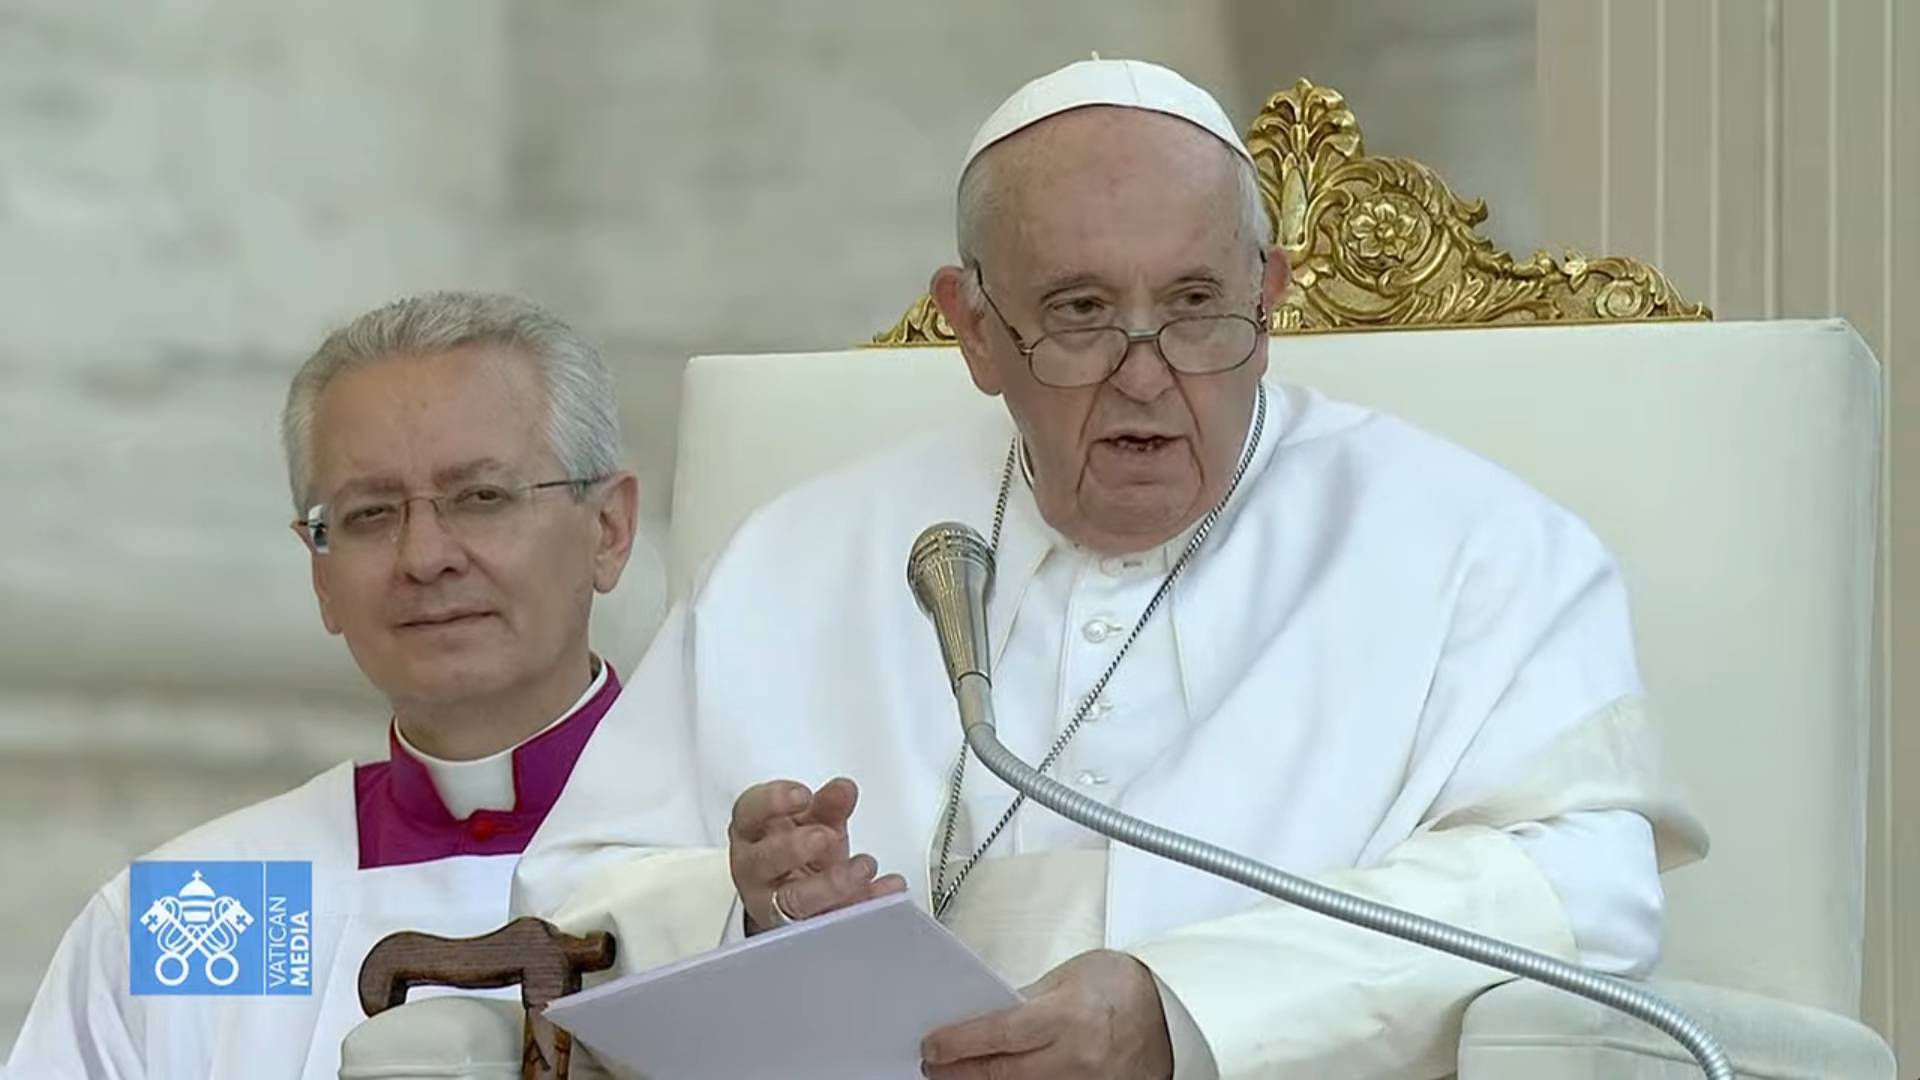 WMOF 2022: Pope Francis’ homily at Mass in St. Peter’s Square